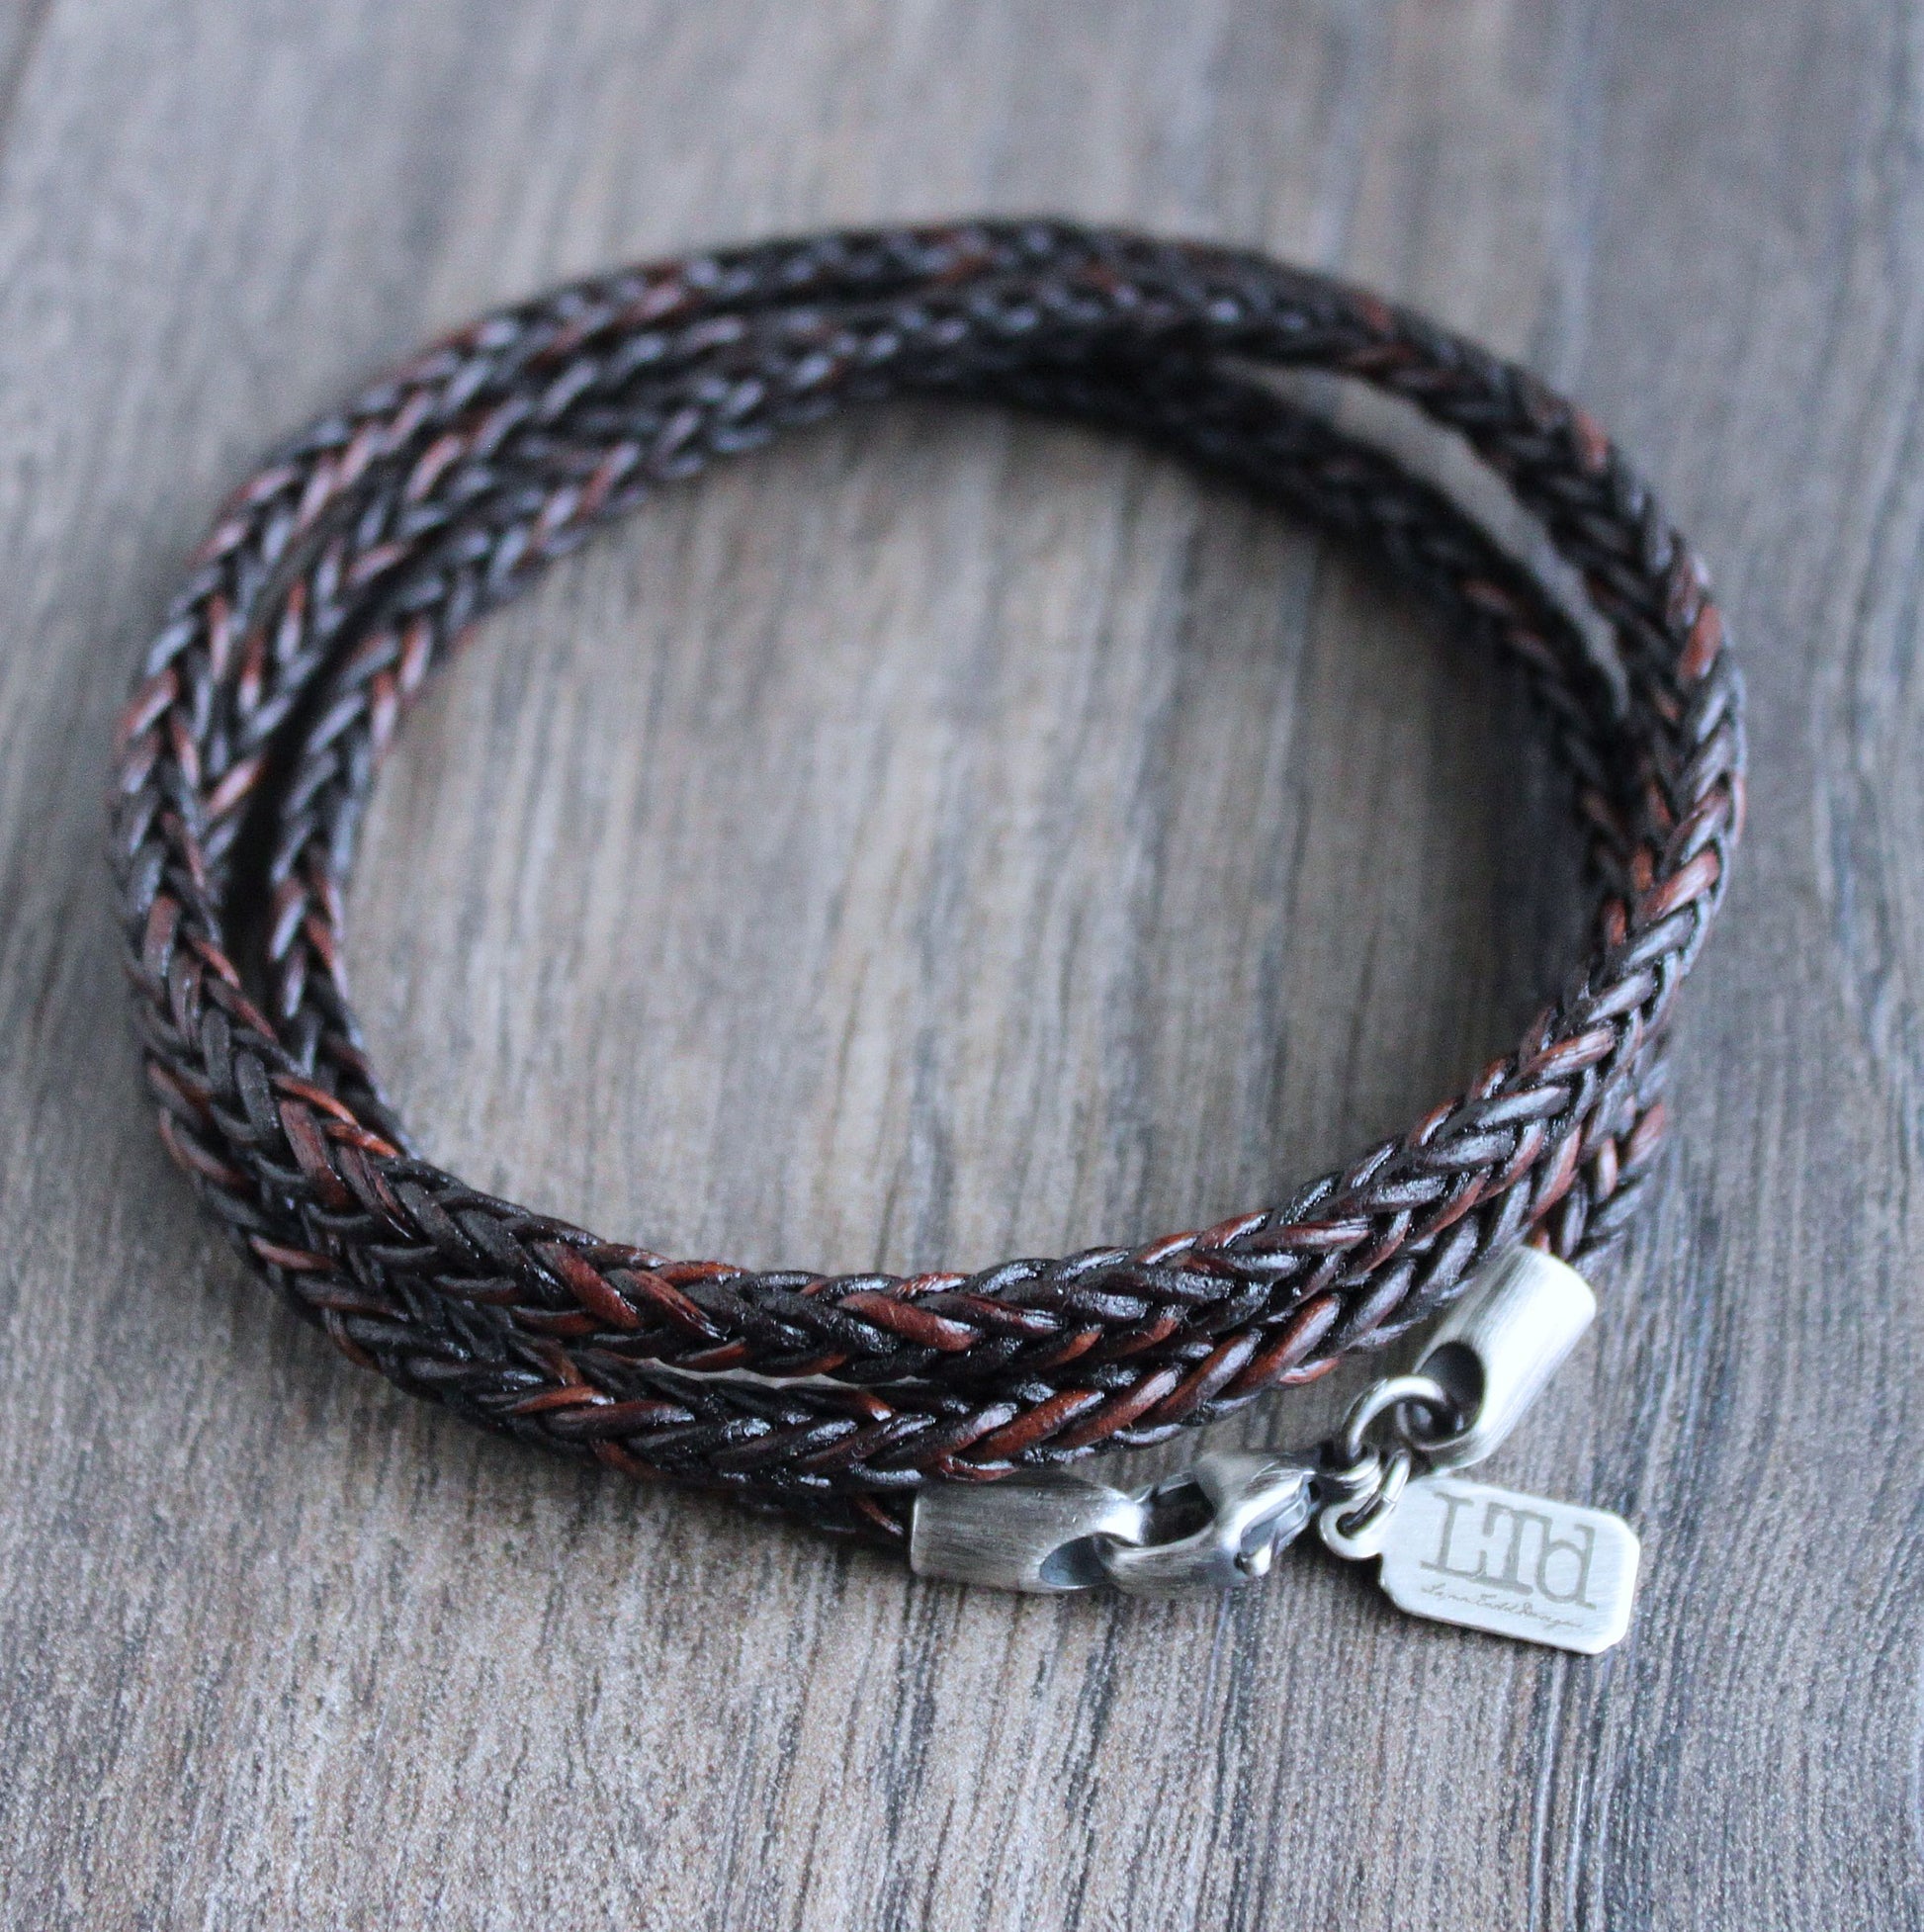 Men's Square Braided Leather Wrap Bracelet, Light Tan Brown M 7.75 Inches